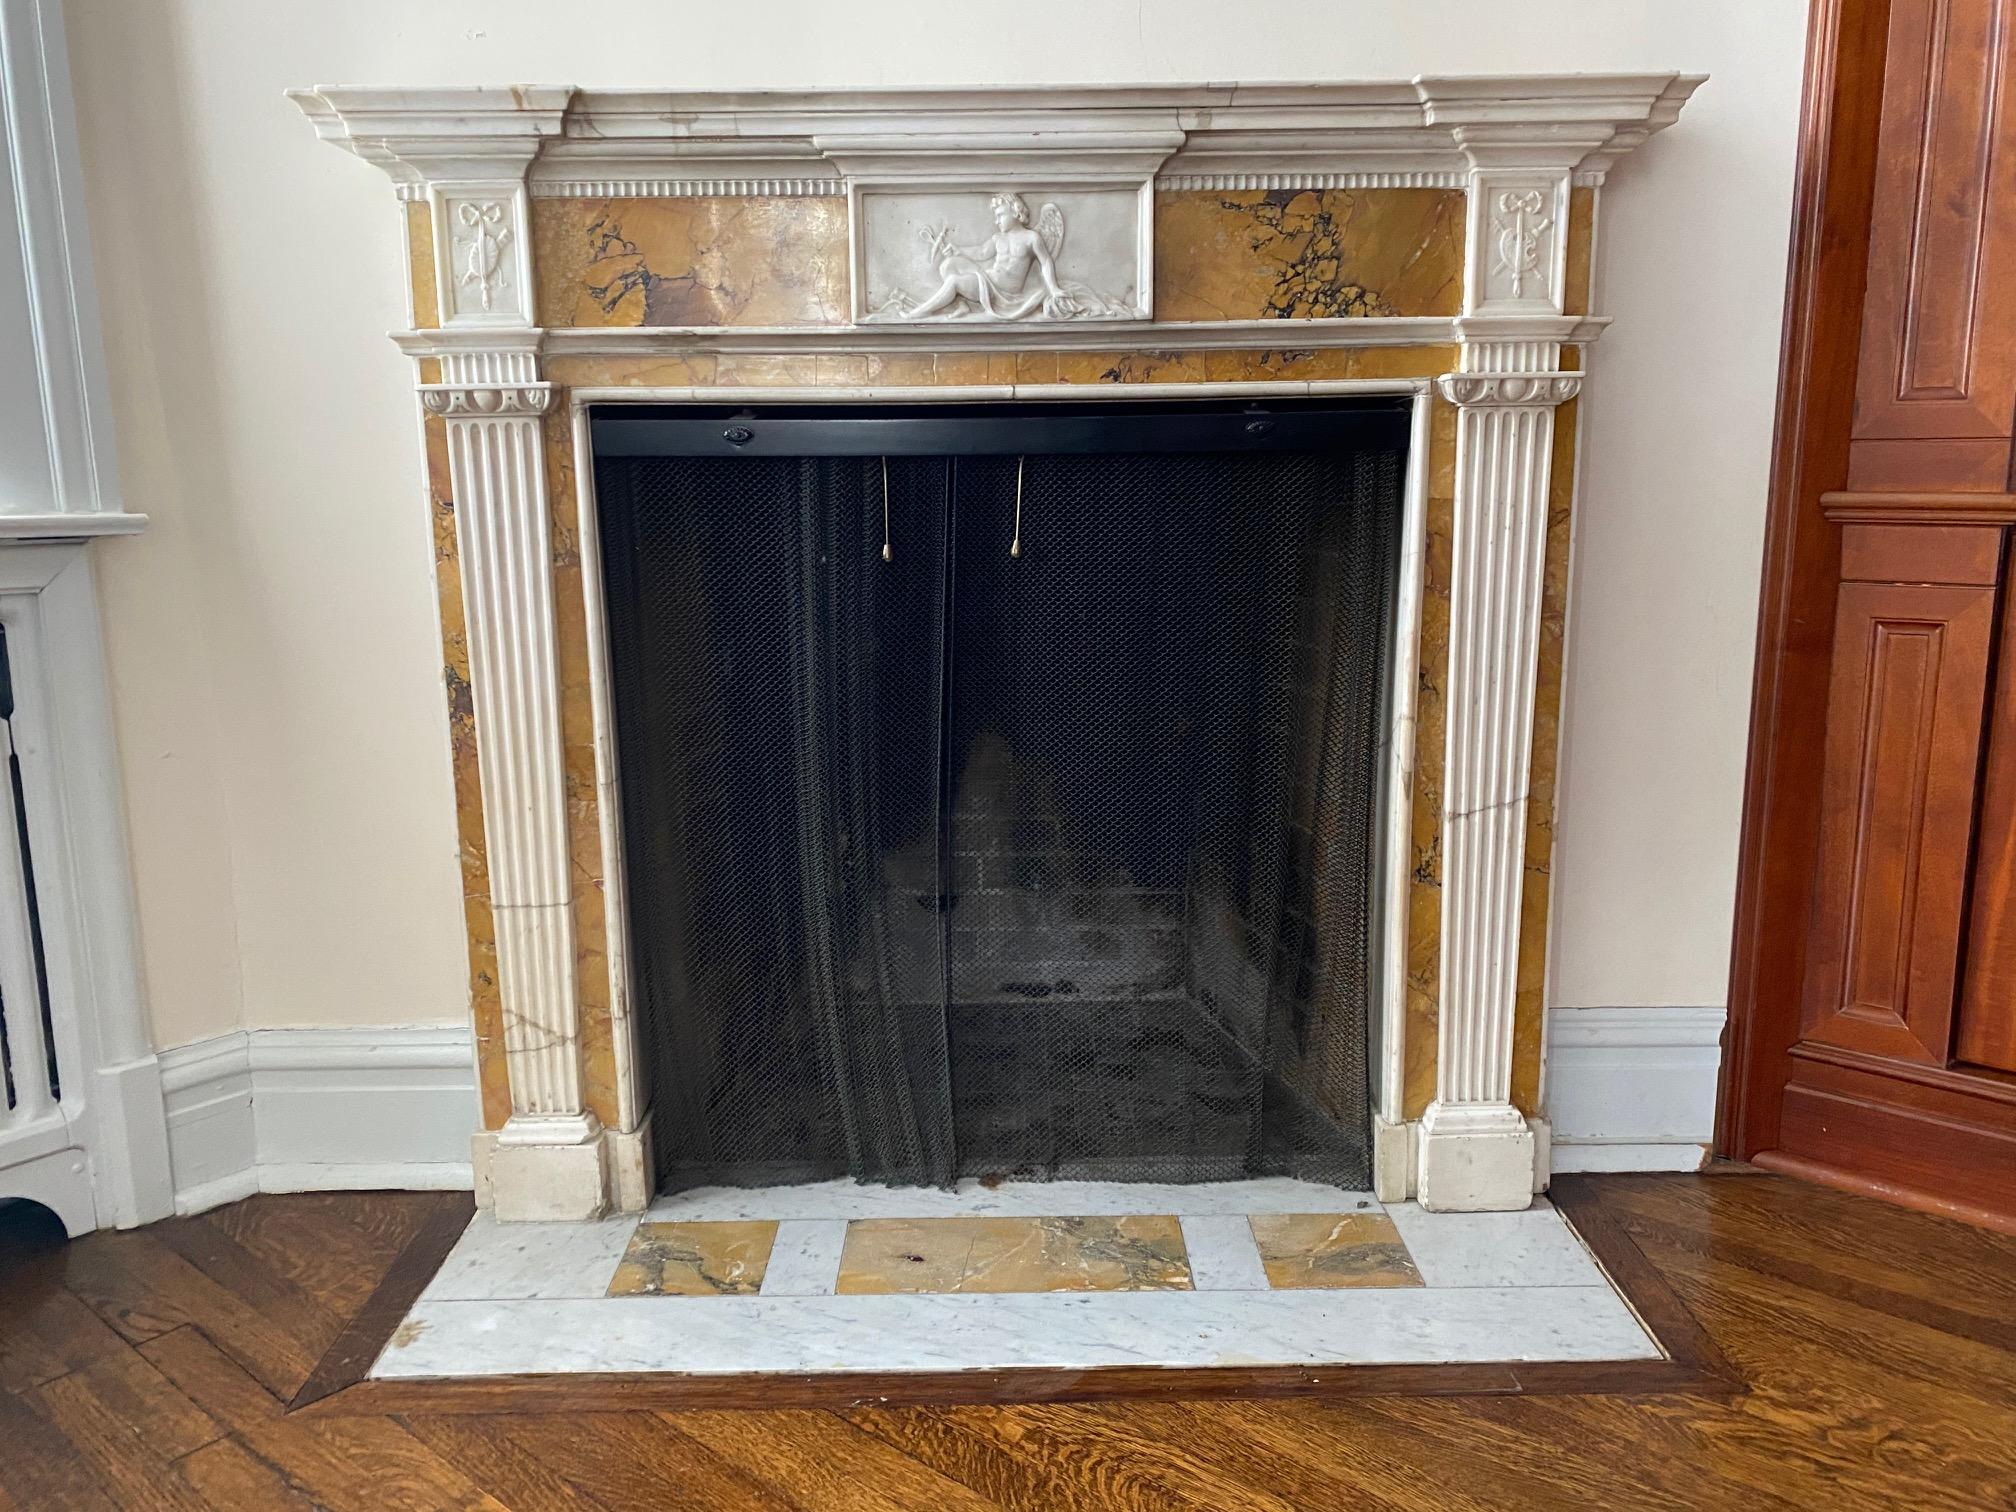 Exquisite Georgian period , white statuary and siena marble fireplace mantel, featuring beautifully carved Neo-Classical attributes , the center cartouche depicting a cherub Cupid playing with a dragonfly.
Interior dimensions: H:35.25 x L:33.5